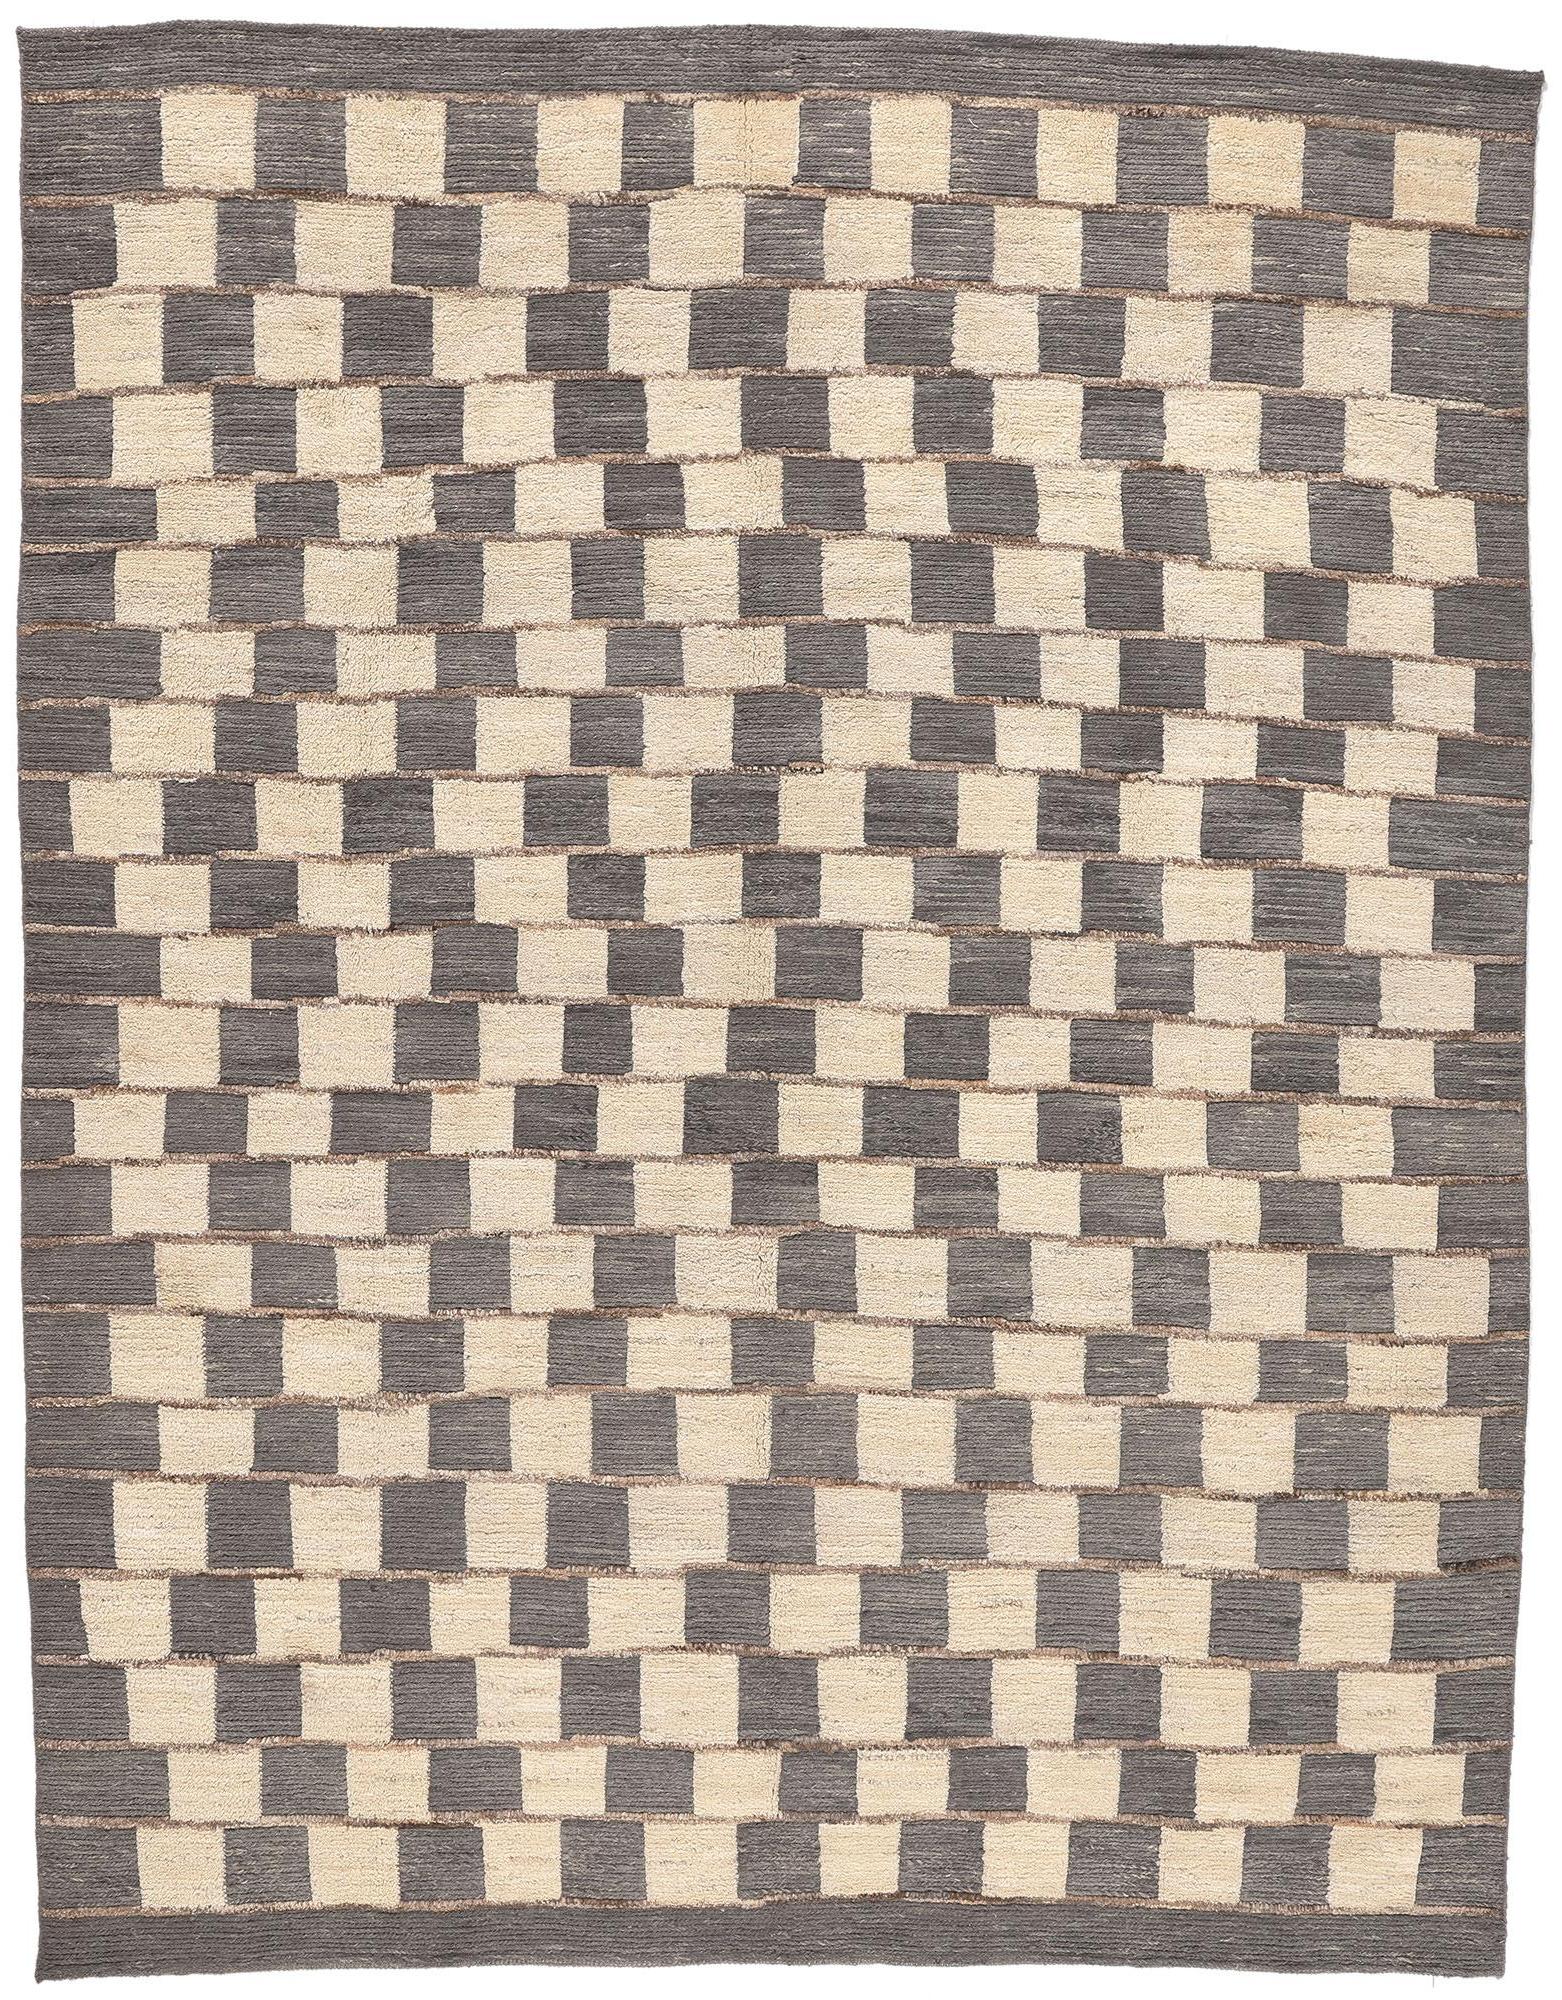 Organic Brutalist Moroccan Textured Rug Neutral Earth-Tones For Sale